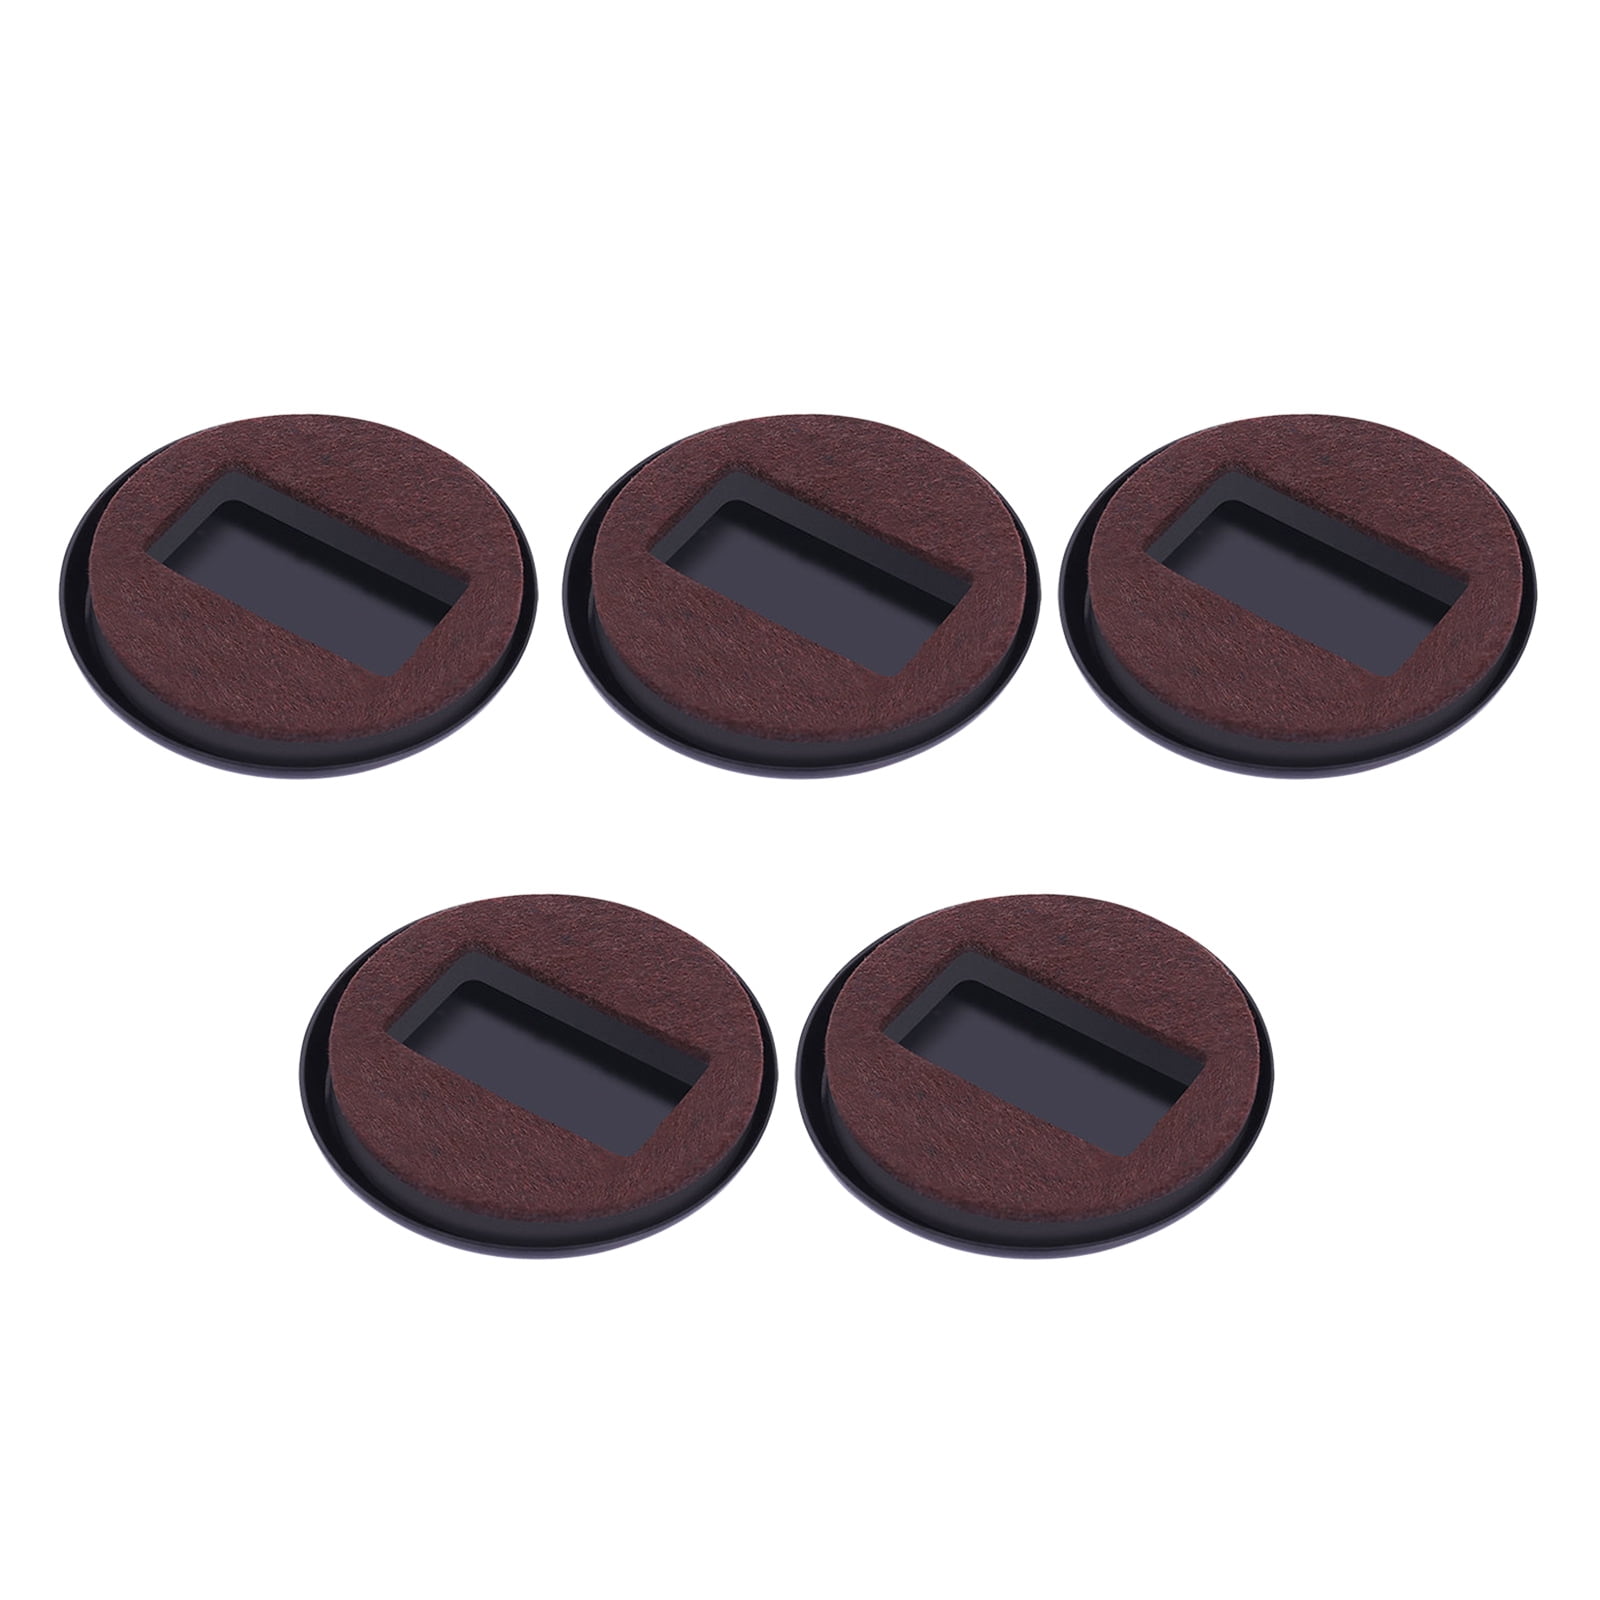 Details about   Set of 4 Bed Roller Furniture Wheel Gripper Cups Lock Coaster Floor Protector 